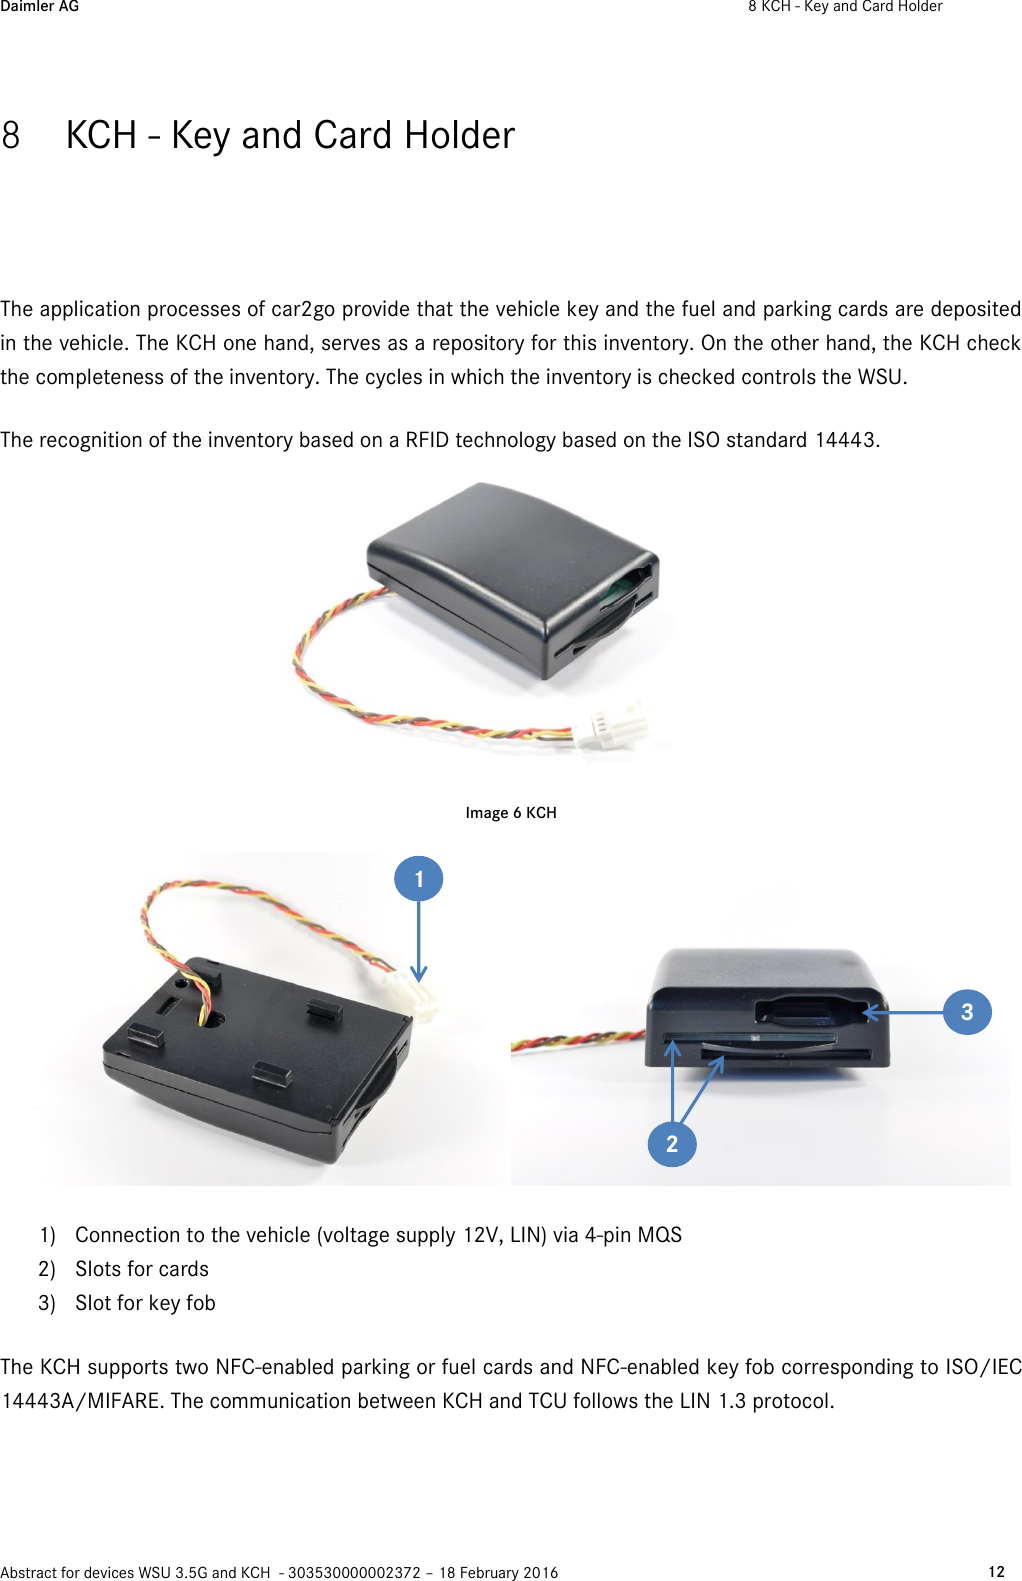 Daimler AG  8 KCH - Key and Card Holder    Abstract for devices WSU 3.5G and KCH  - 303530000002372 – 18 February 2016   12  8 KCH - Key and Card Holder  The application processes of car2go provide that the vehicle key and the fuel and parking cards are deposited in the vehicle. The KCH one hand, serves as a repository for this inventory. On the other hand, the KCH check the completeness of the inventory. The cycles in which the inventory is checked controls the WSU. The recognition of the inventory based on a RFID technology based on the ISO standard 14443.  Image 6 KCH  1) Connection to the vehicle (voltage supply 12V, LIN) via 4-pin MQS 2) Slots for cards 3) Slot for key fob The KCH supports two NFC-enabled parking or fuel cards and NFC-enabled key fob corresponding to ISO/IEC 14443A/MIFARE. The communication between KCH and TCU follows the LIN 1.3 protocol.  1 2 3 